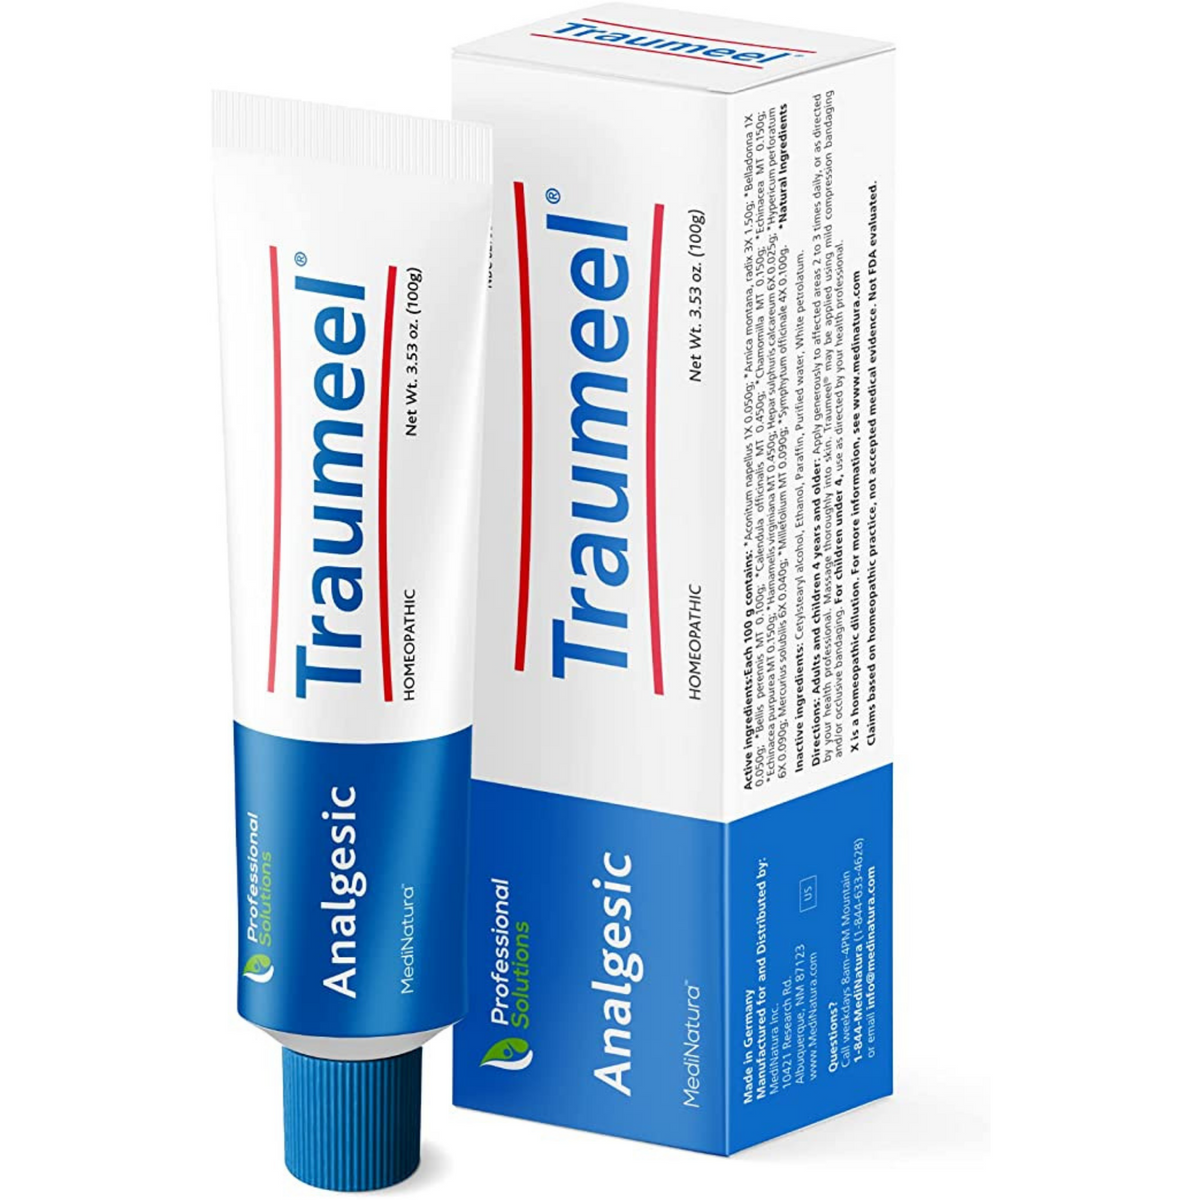 Primary Image of Medinatura Traumeel Ointment